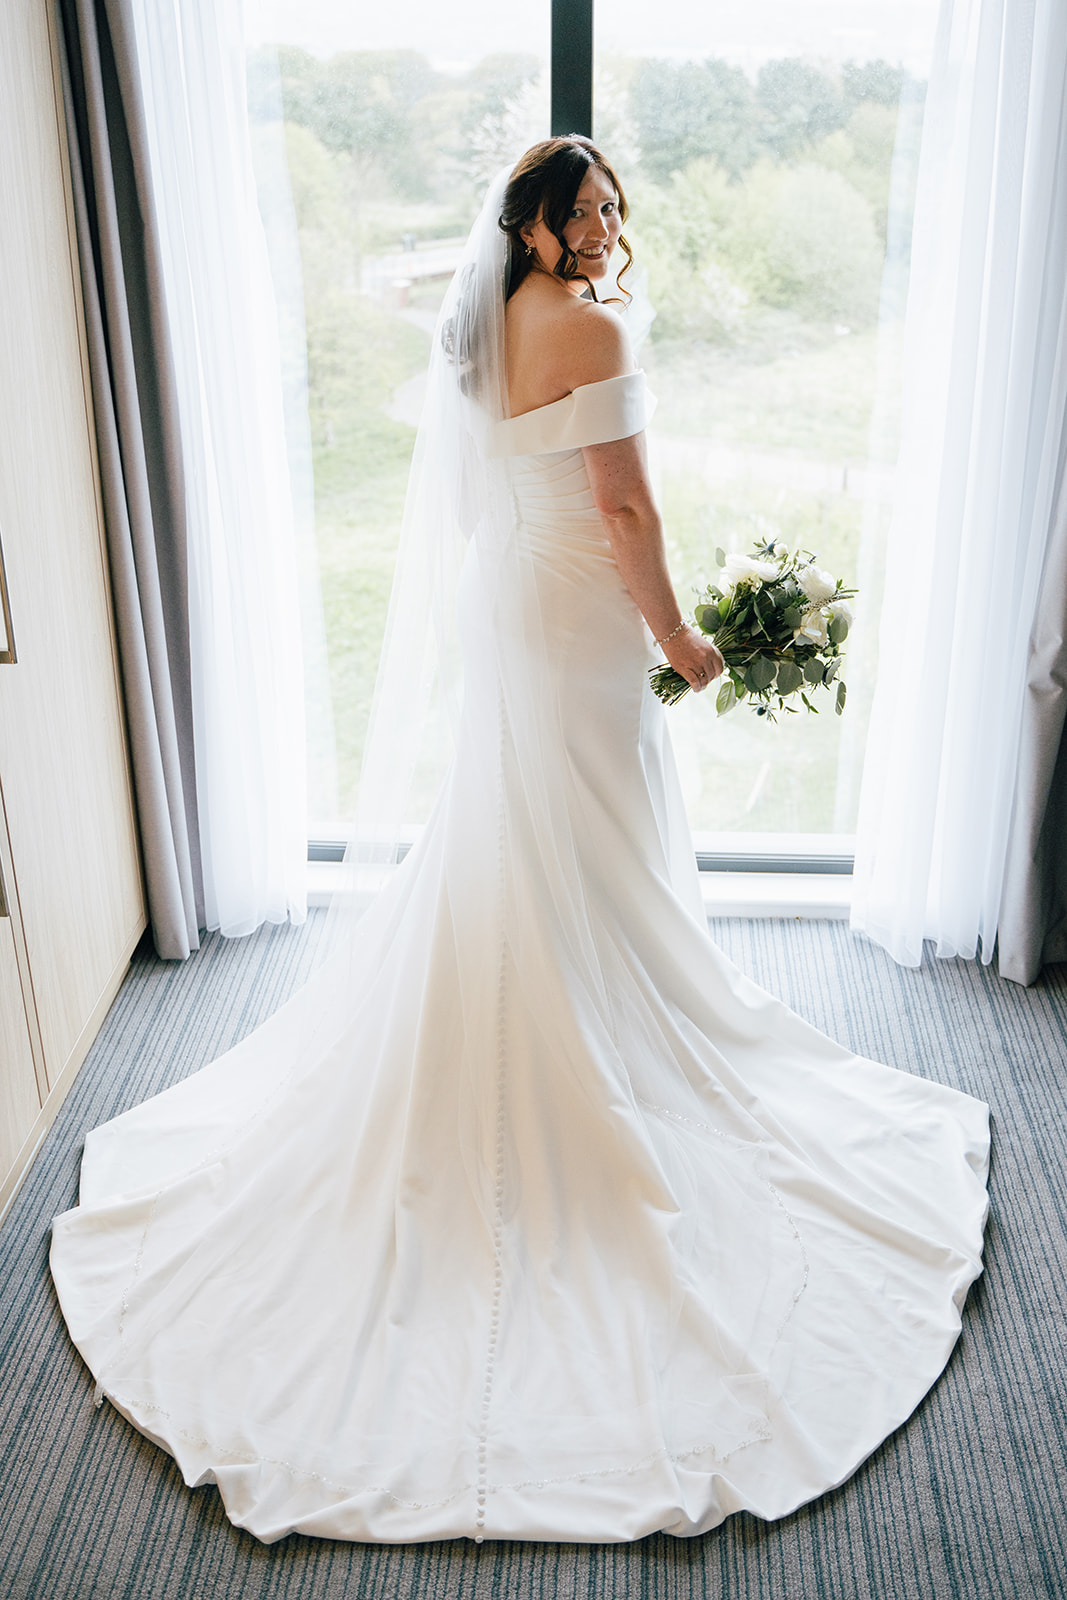 Photograph of the bride at Keele Hall